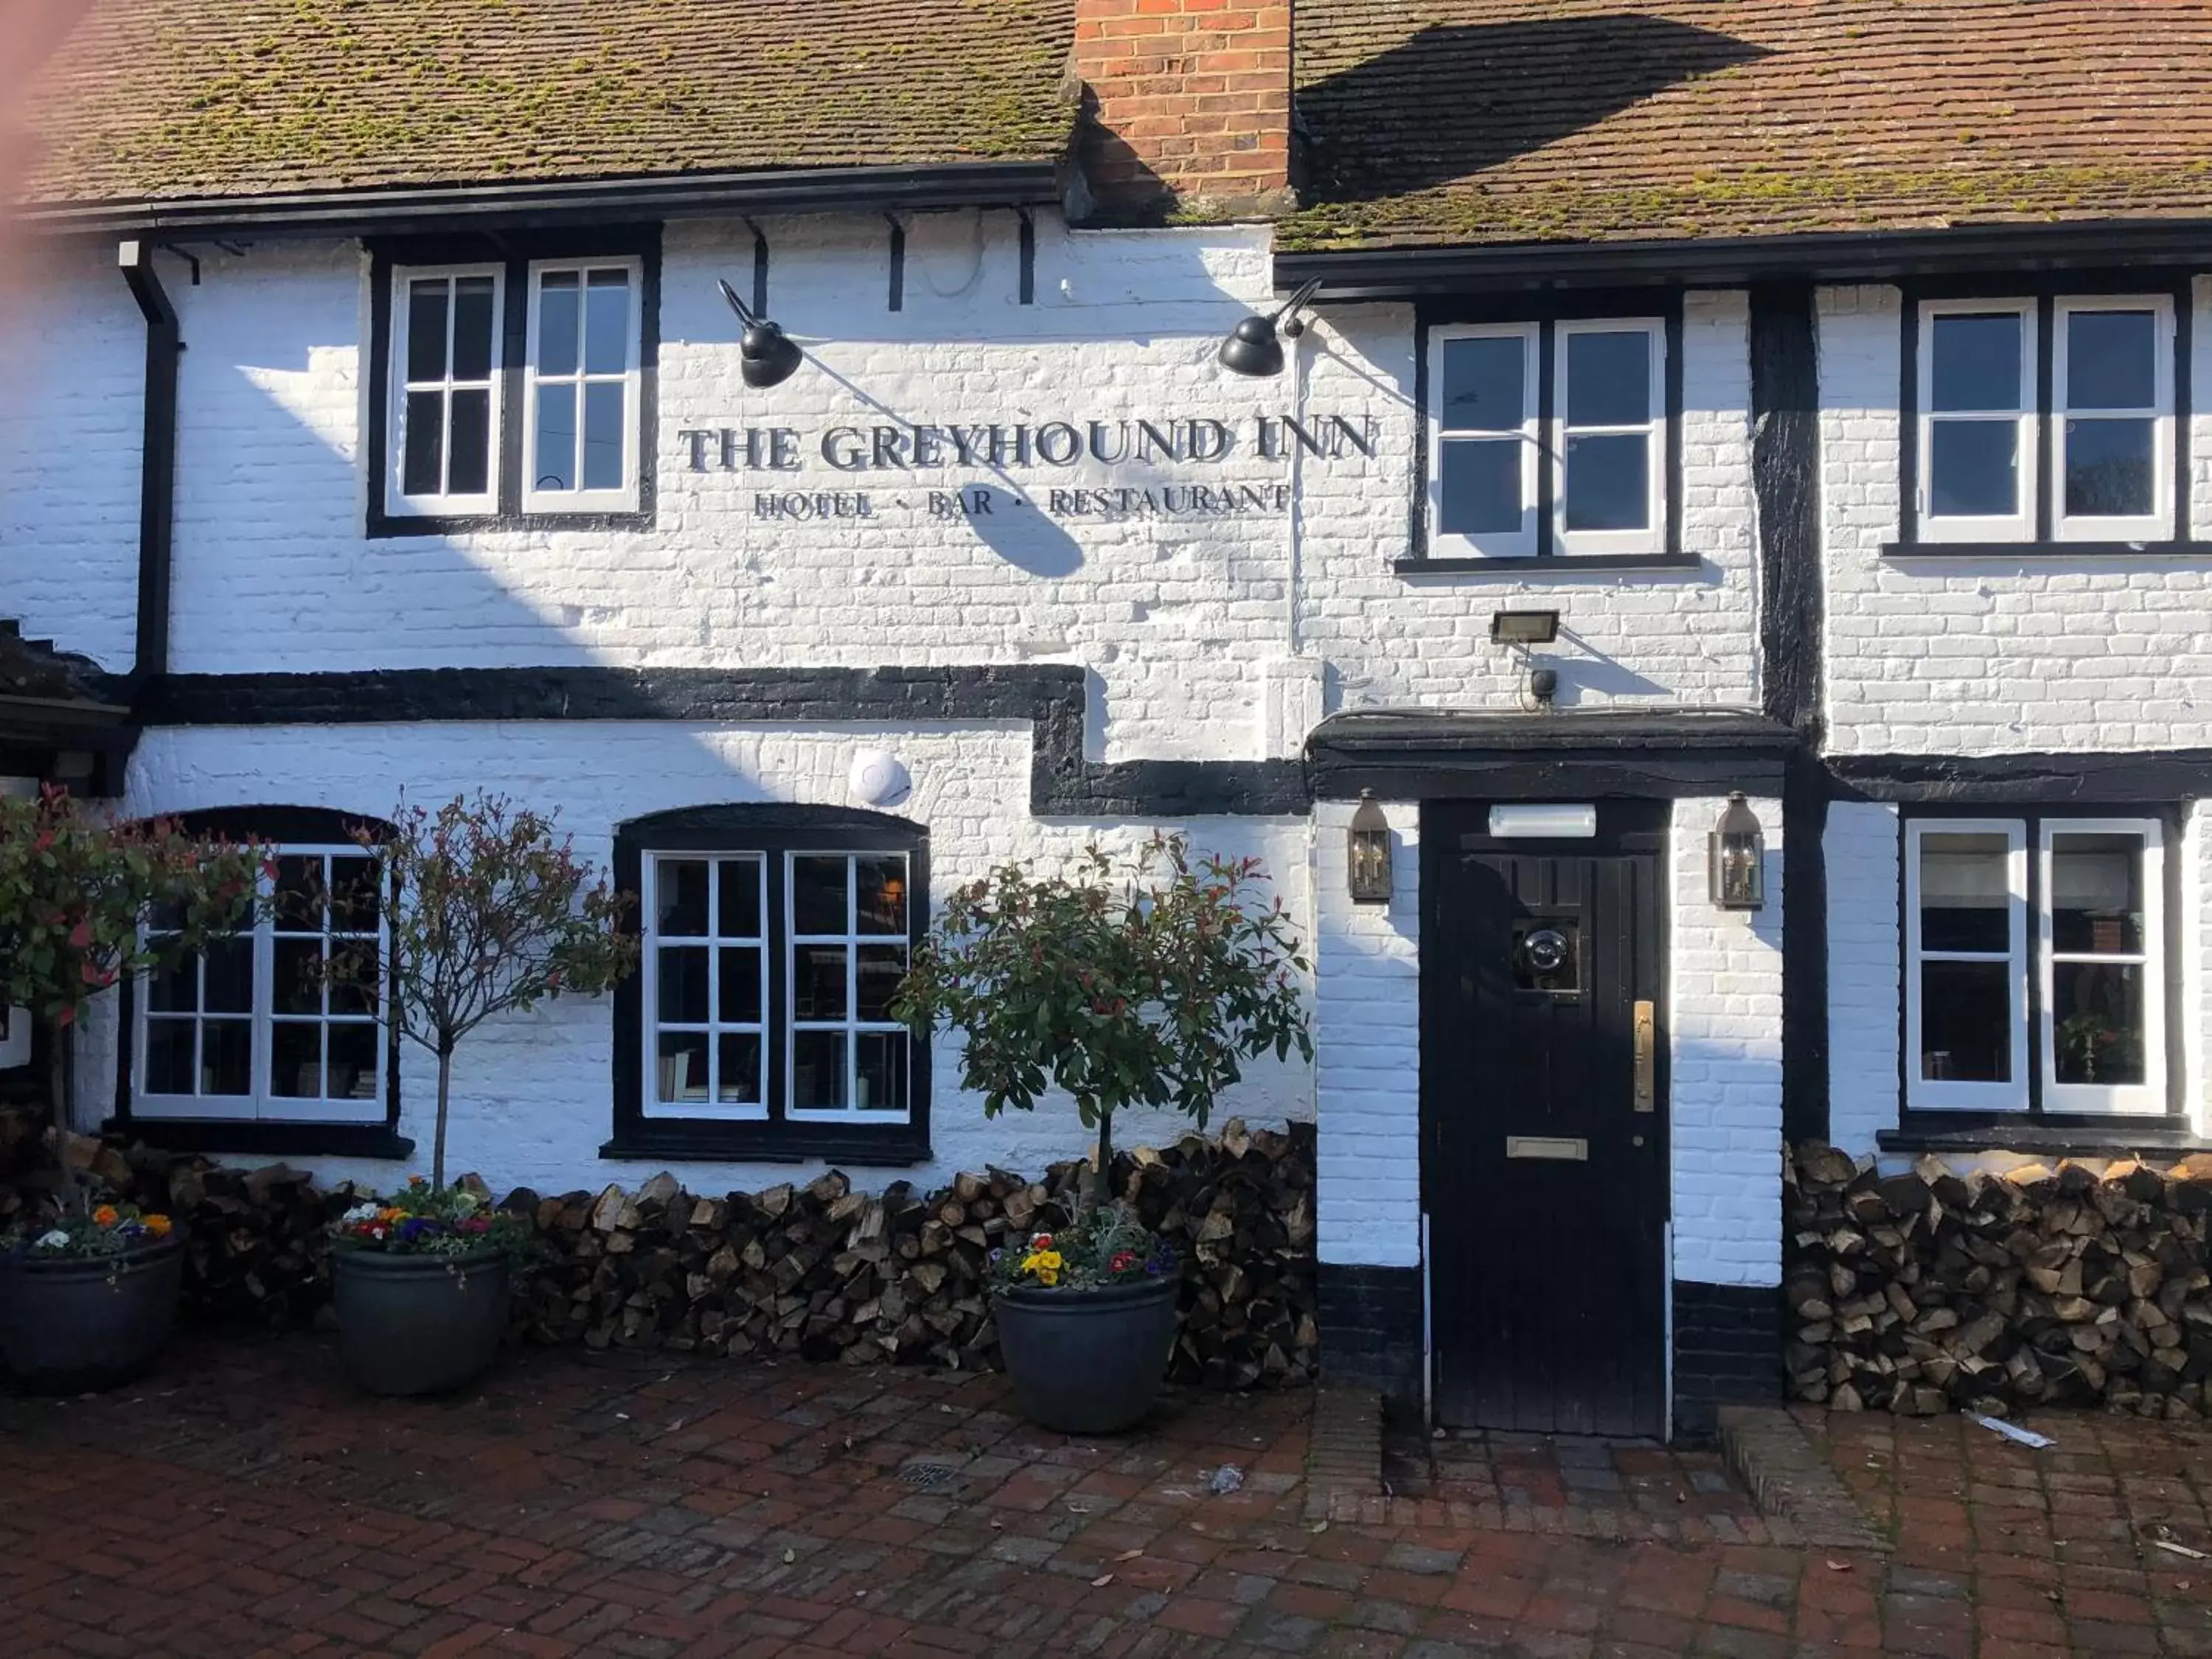 Property building in The Greyhound Inn